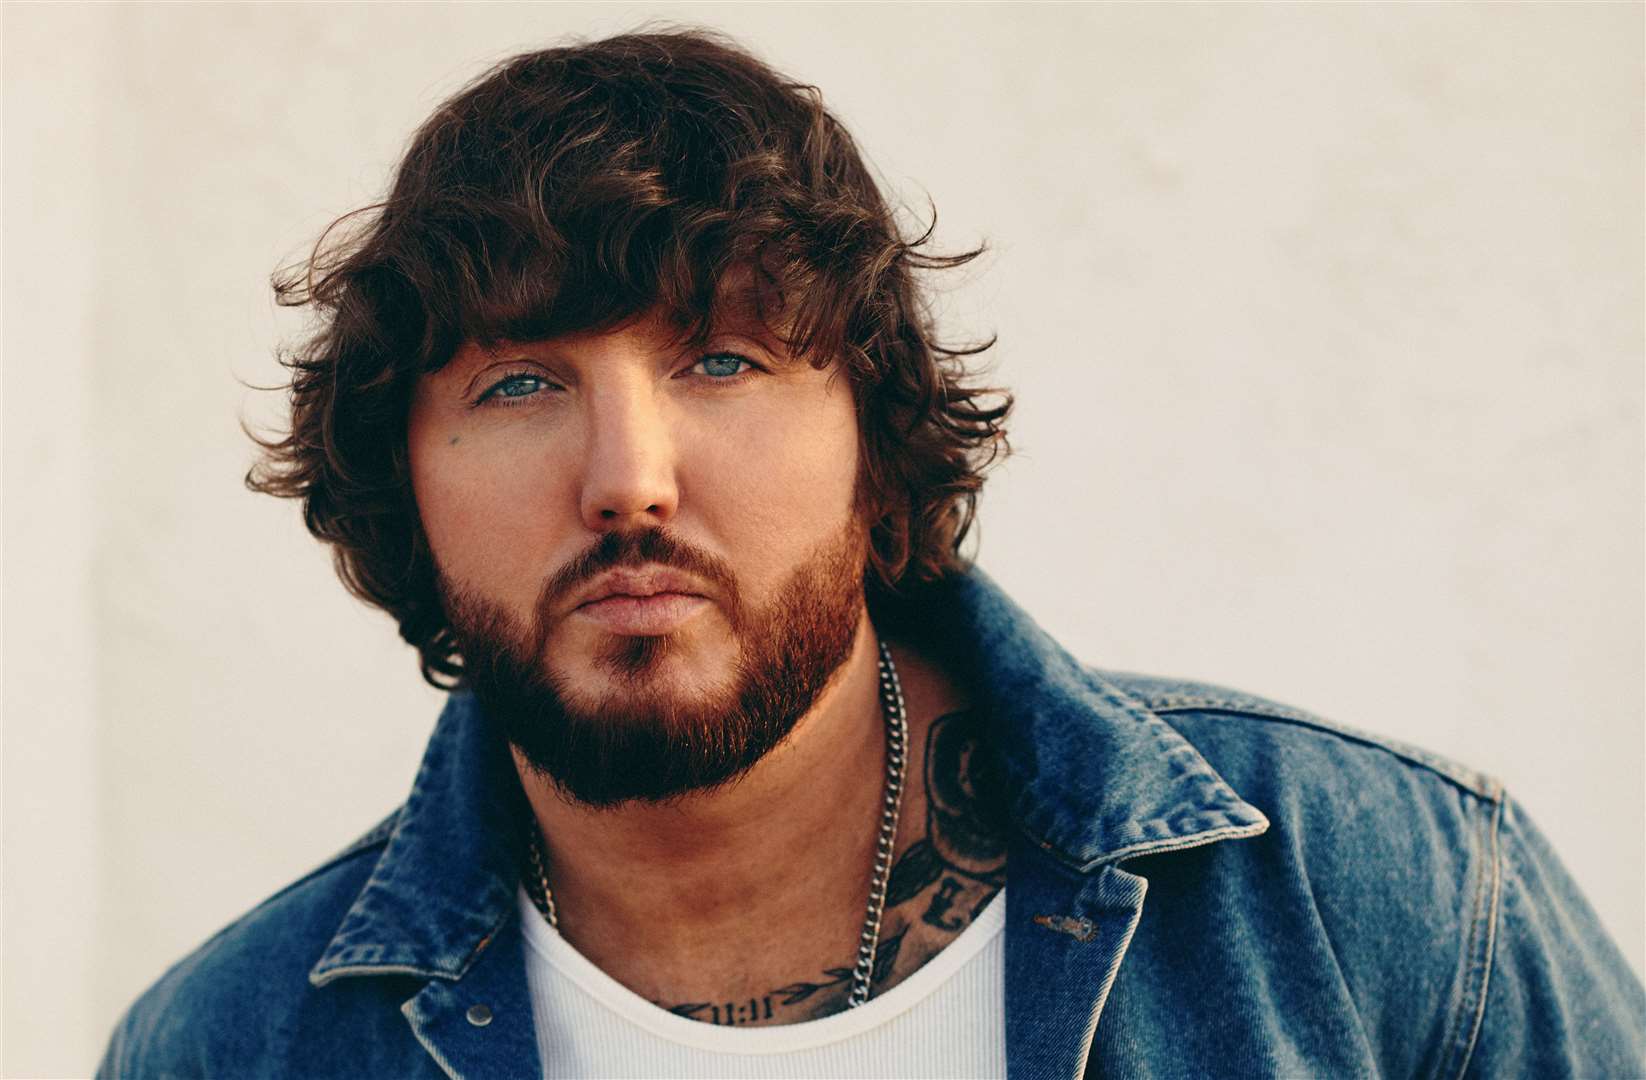 Singer James Arthur will perform at Dreamland in Margate this summer. Picture: Edward Cooke